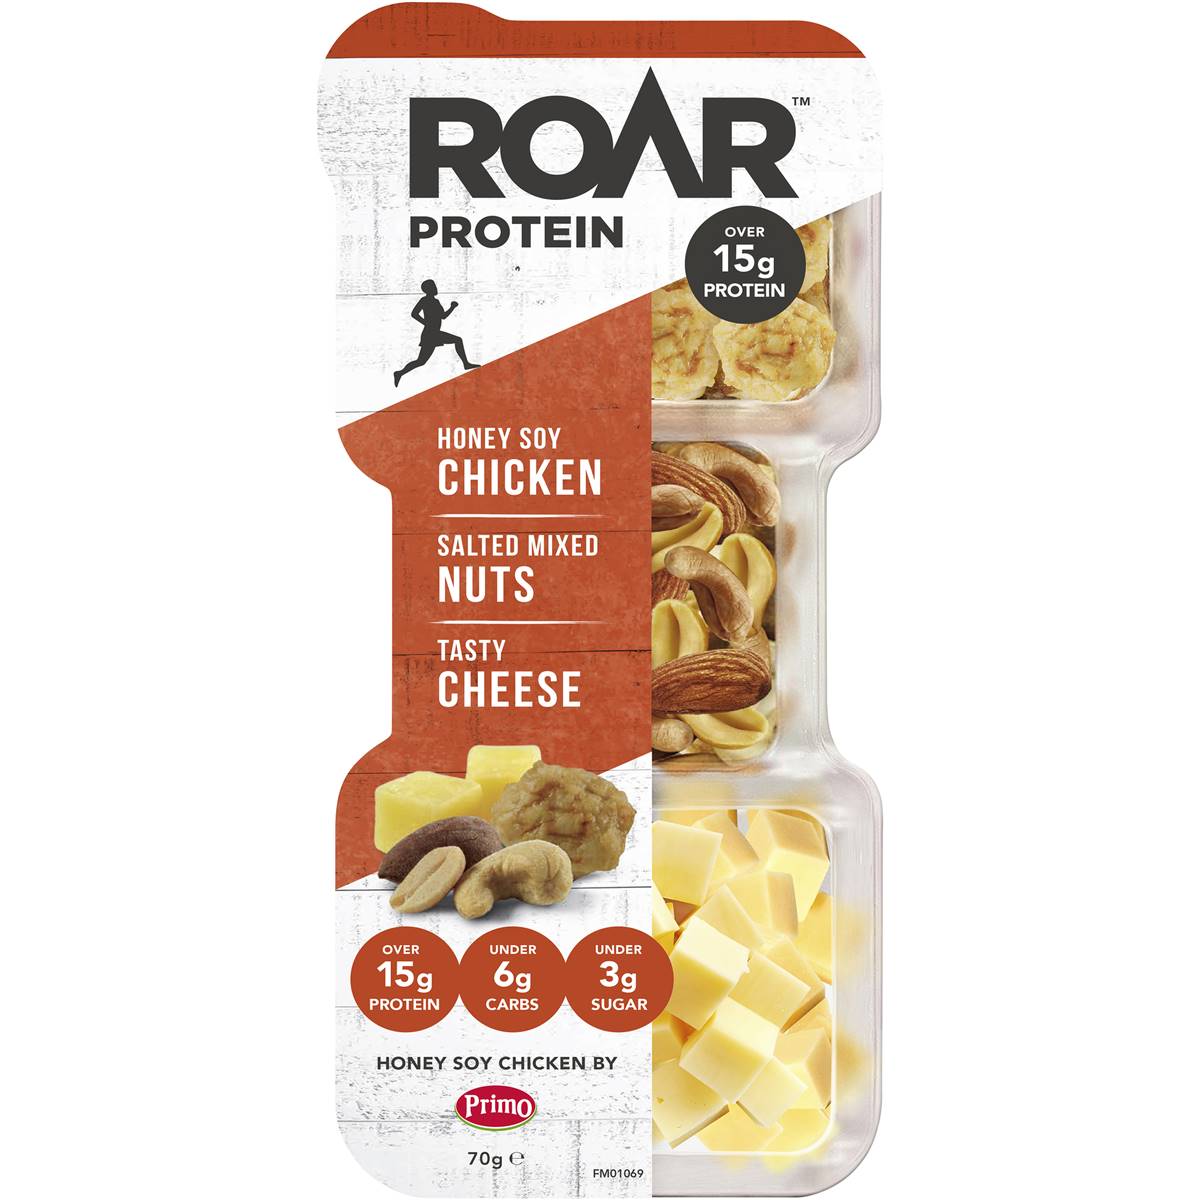 Calories in Roar Protein Honey Soy Chicken, Mixed Nuts & Tasty Cheese